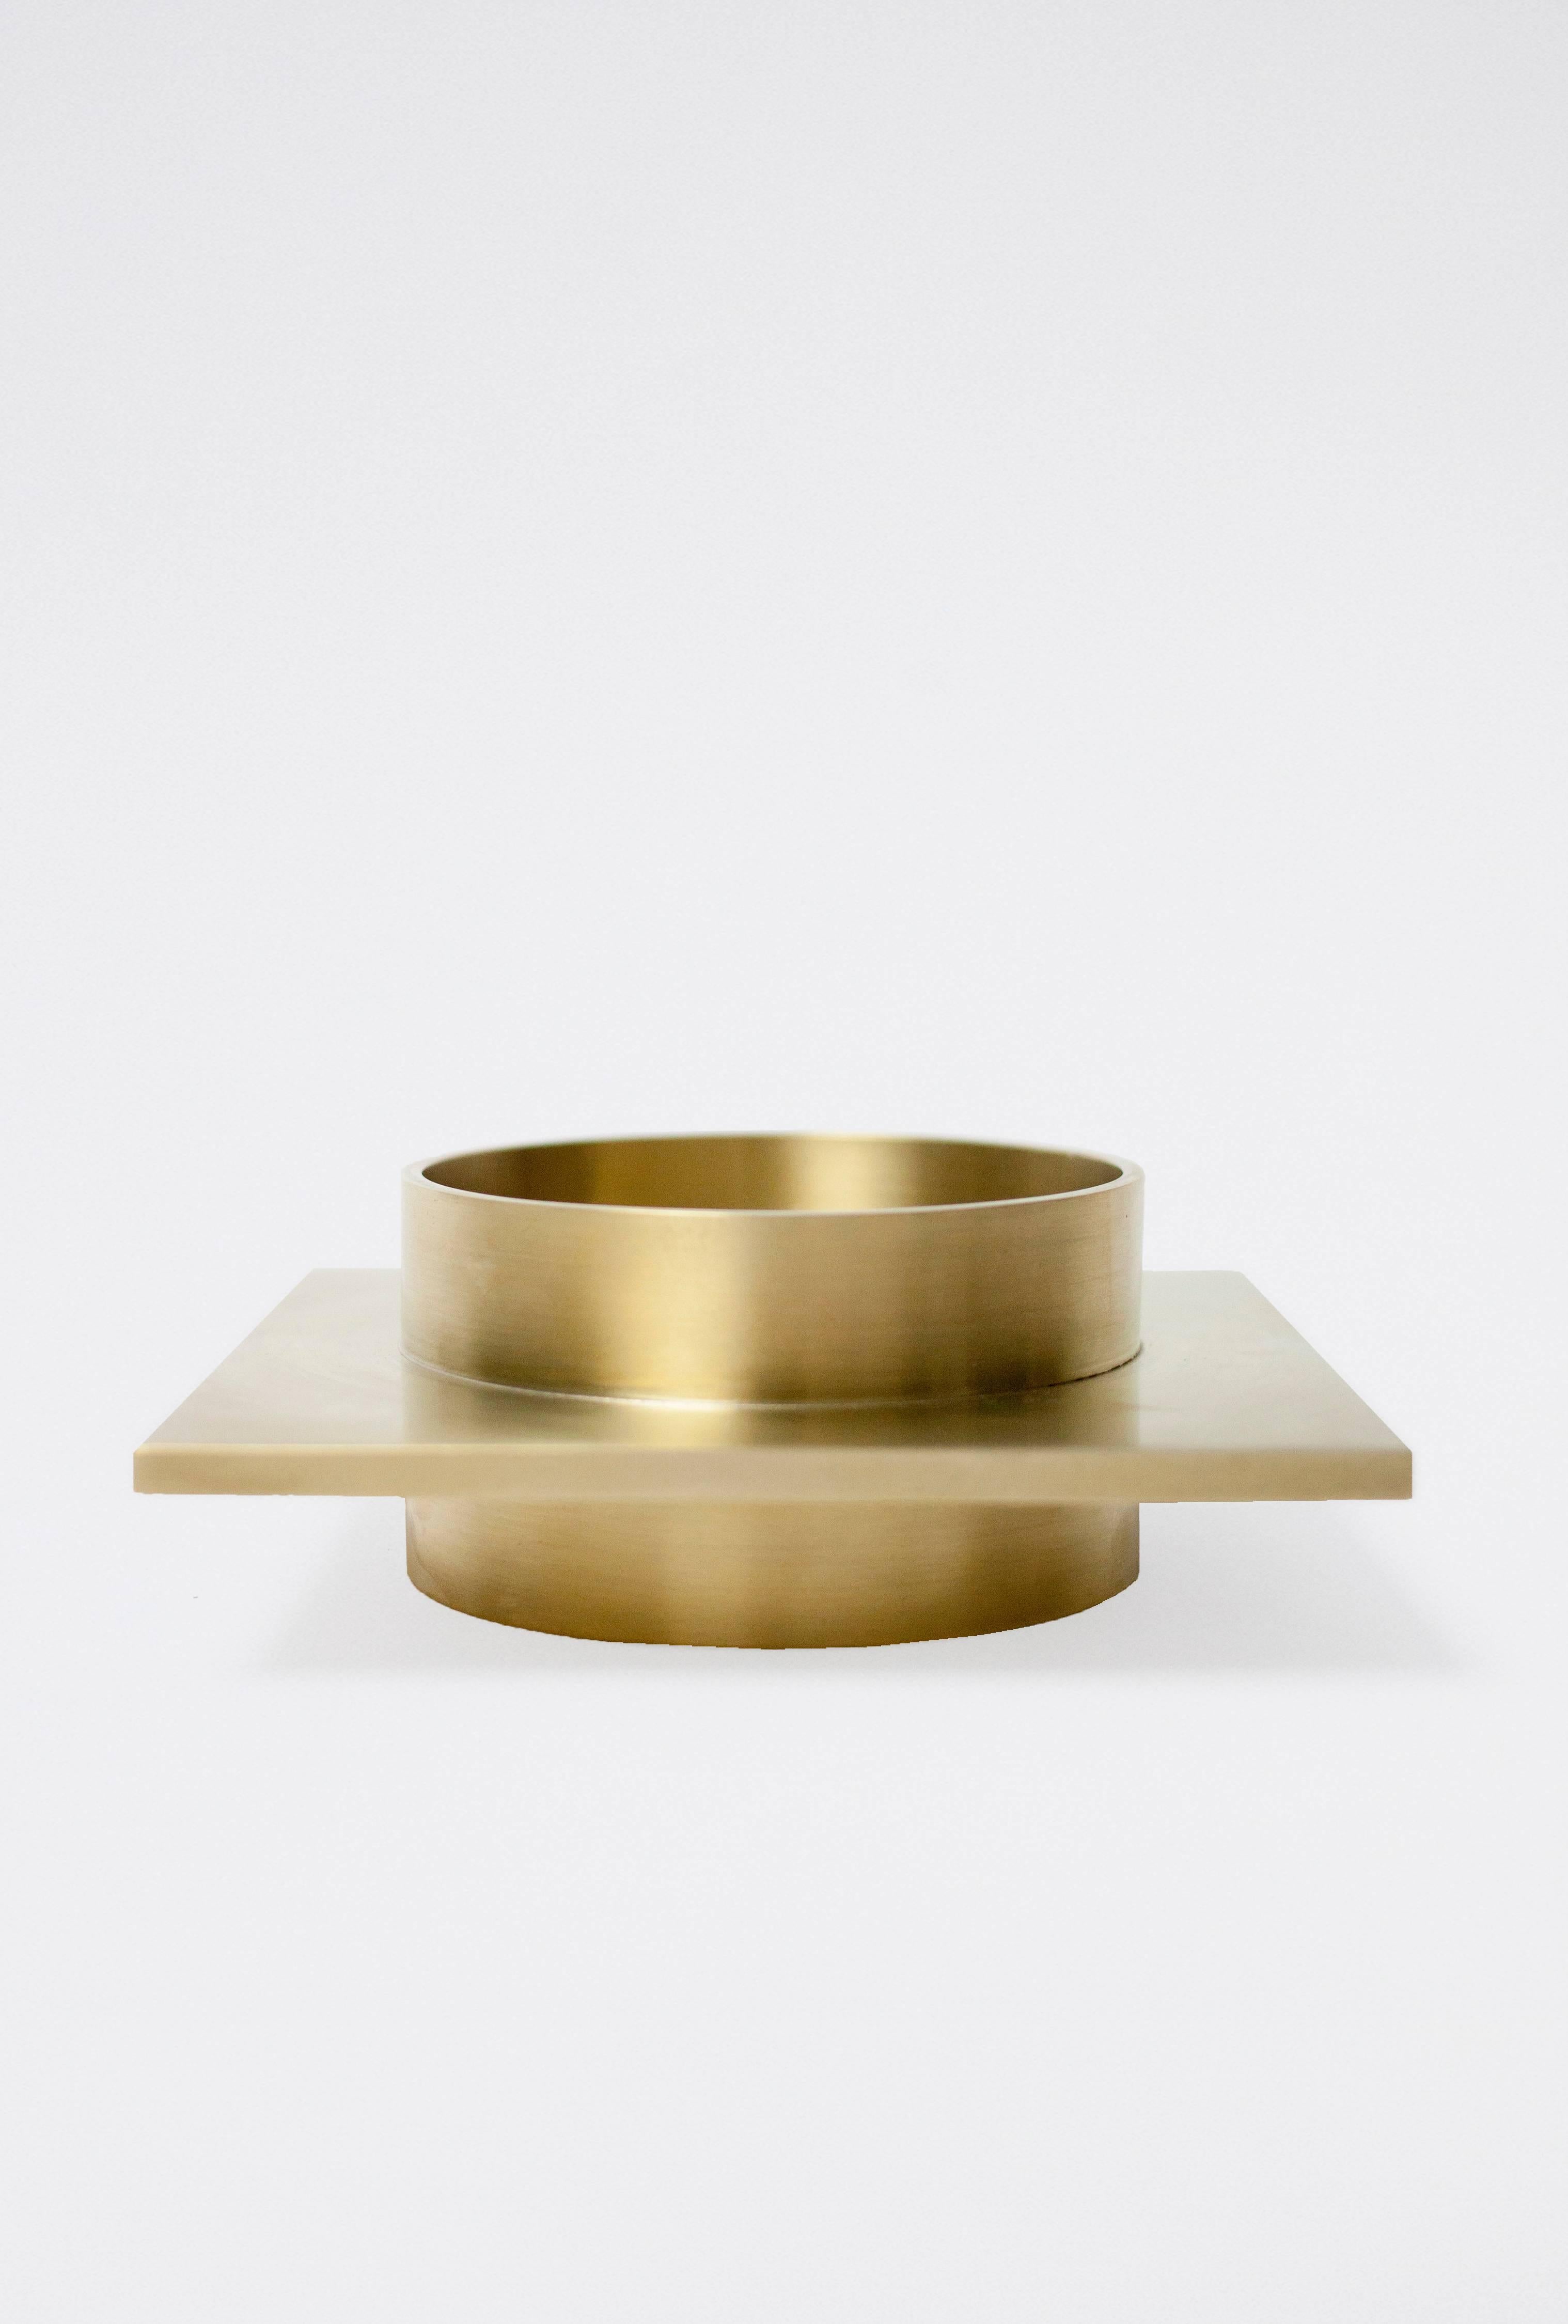 Orphan Work 001 Dish
Shown in brushed brass
Available in brushed brass and blackened brass
Measures 6